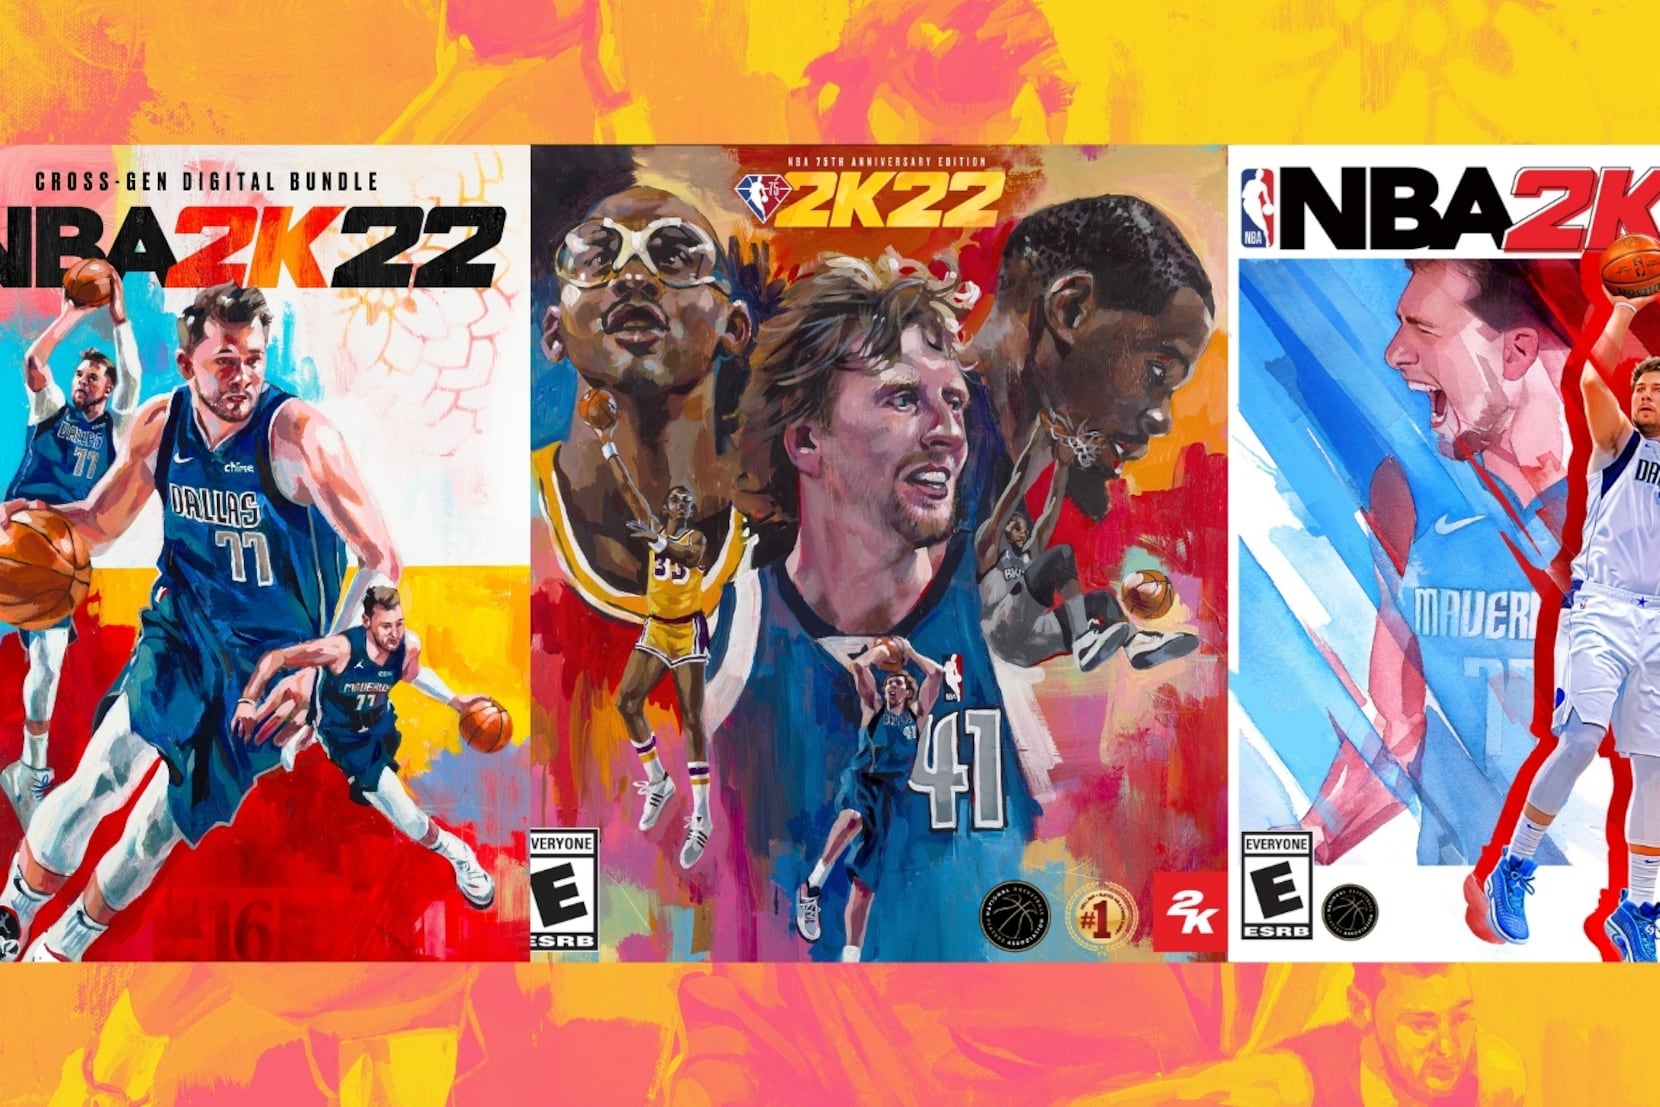 Check out these fake NBA 2K21 covers